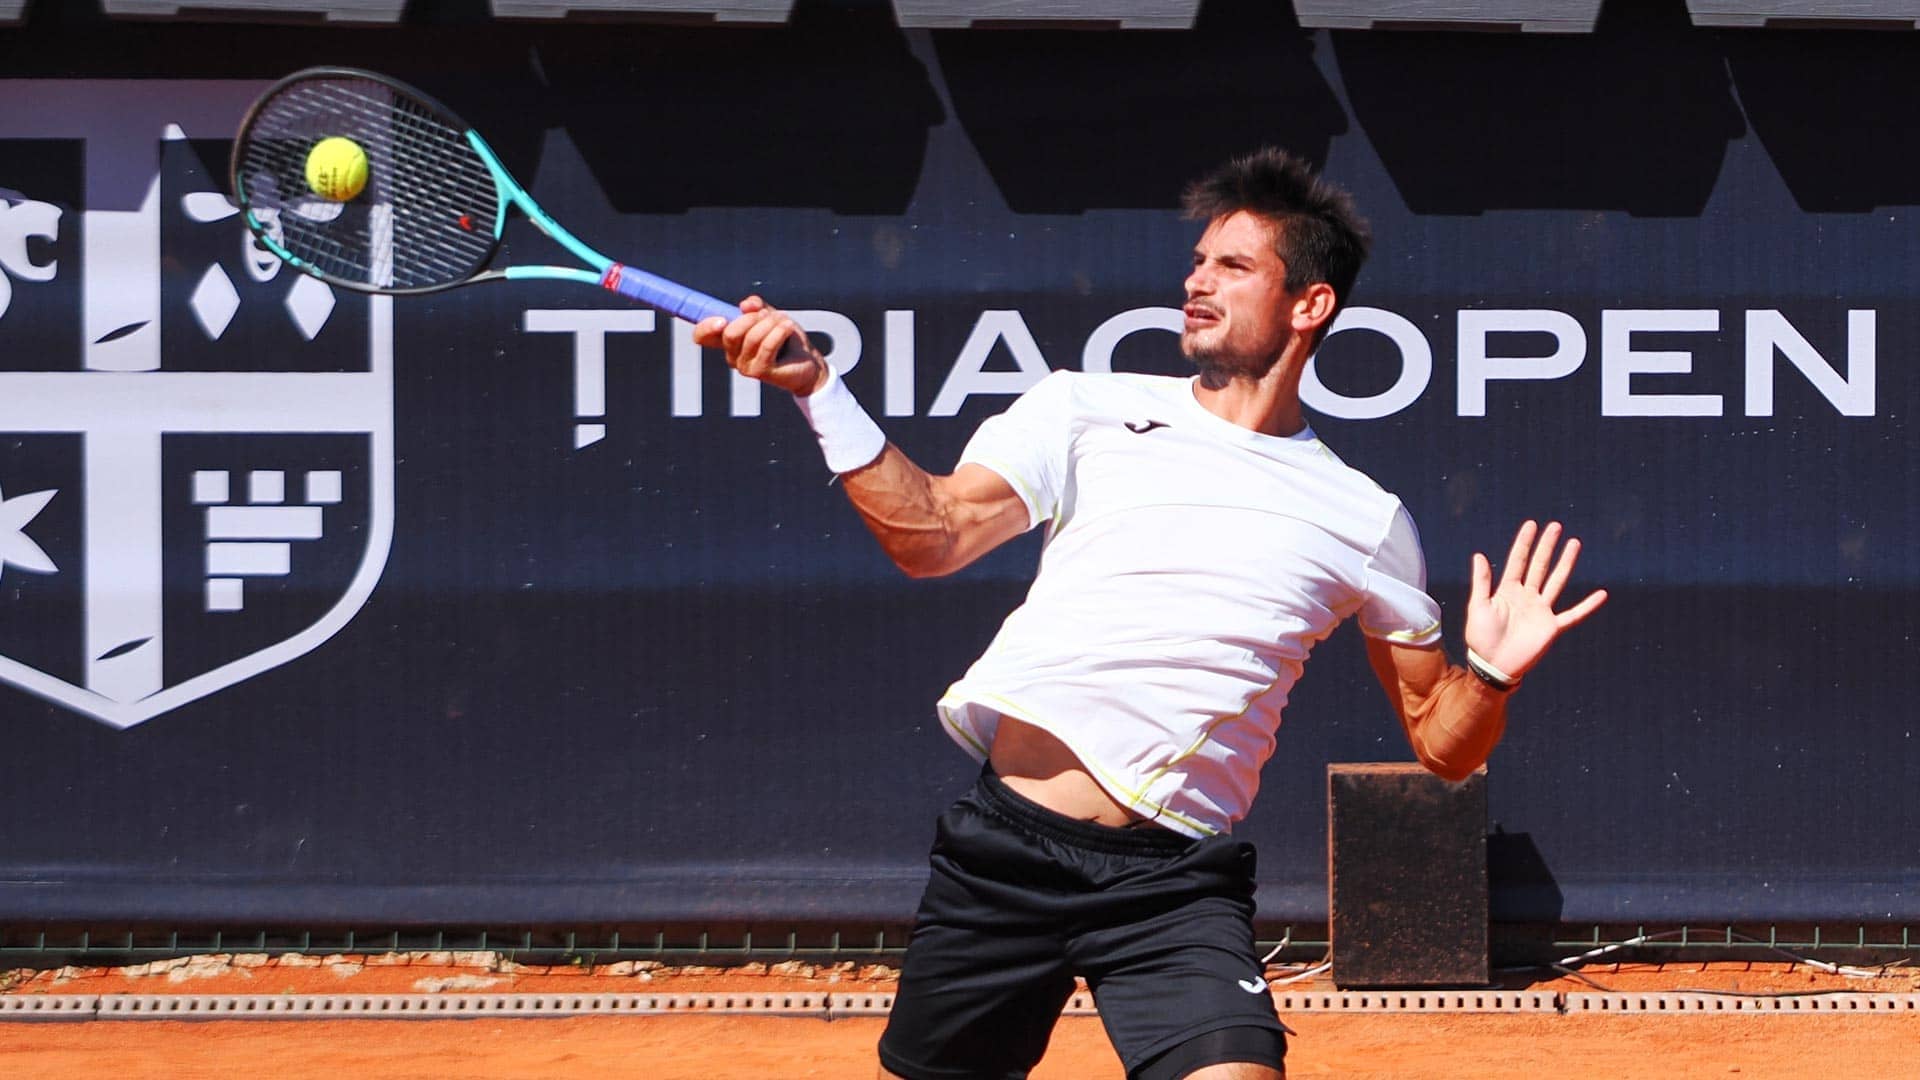 Mariano Navone moves into the Top 50 of the PIF ATP Live Rankings with his opening win in Bucharest.